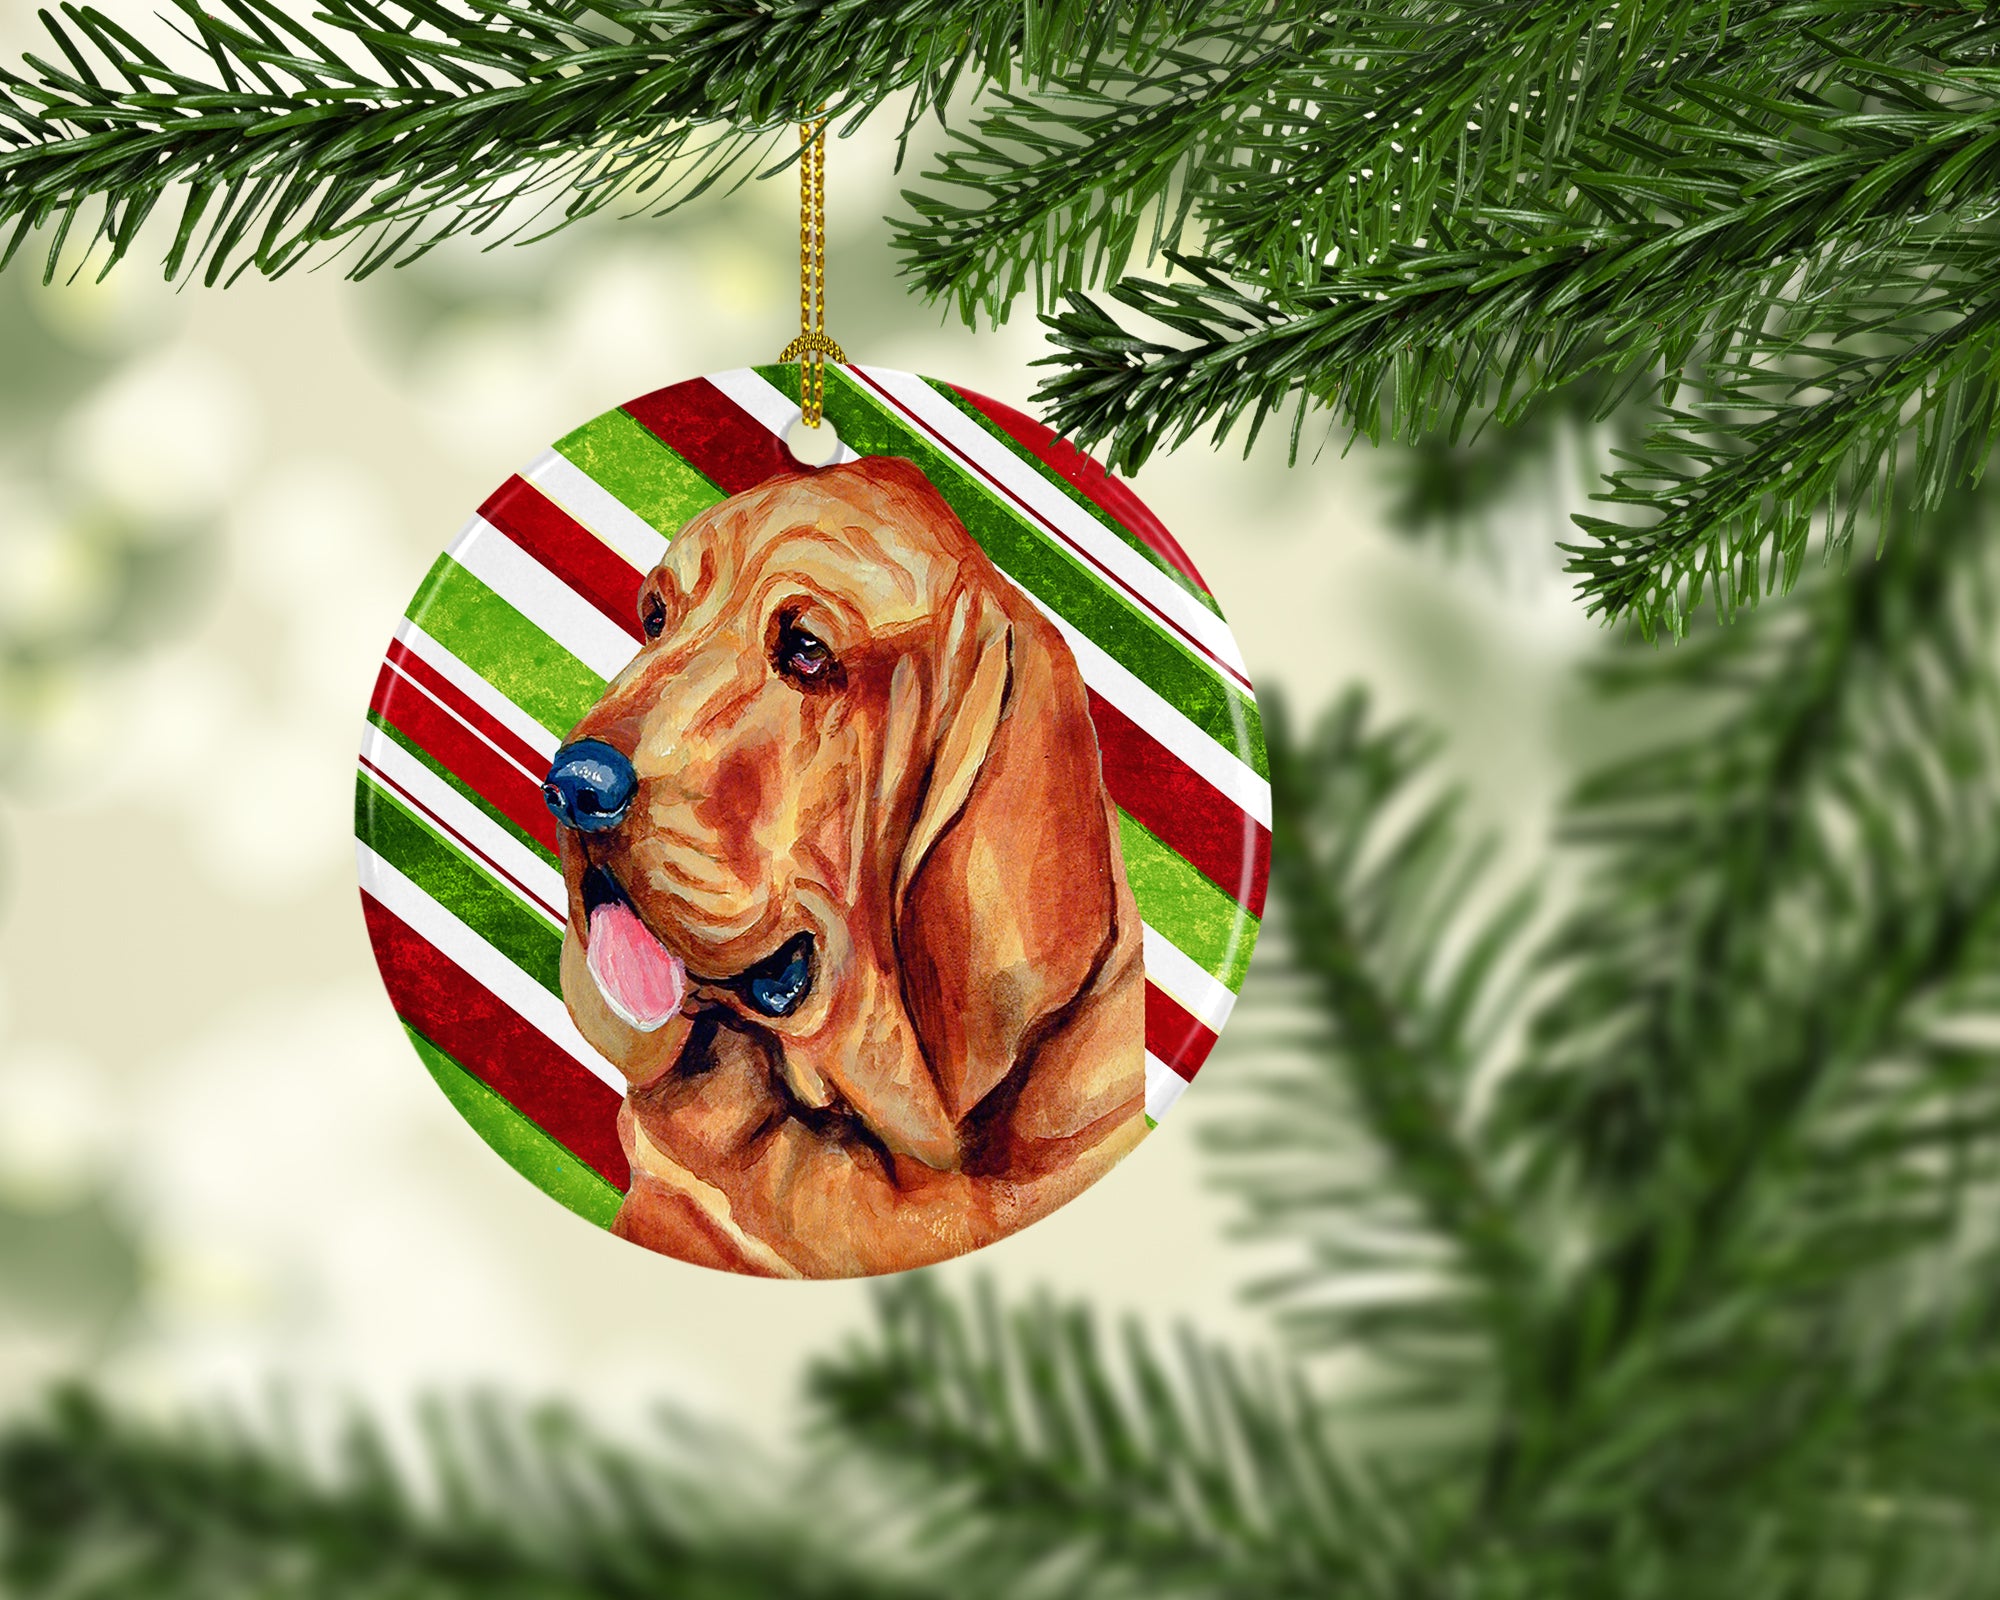 Bloodhound Candy Cane Holiday Christmas Ceramic Ornament LH9241 - the-store.com